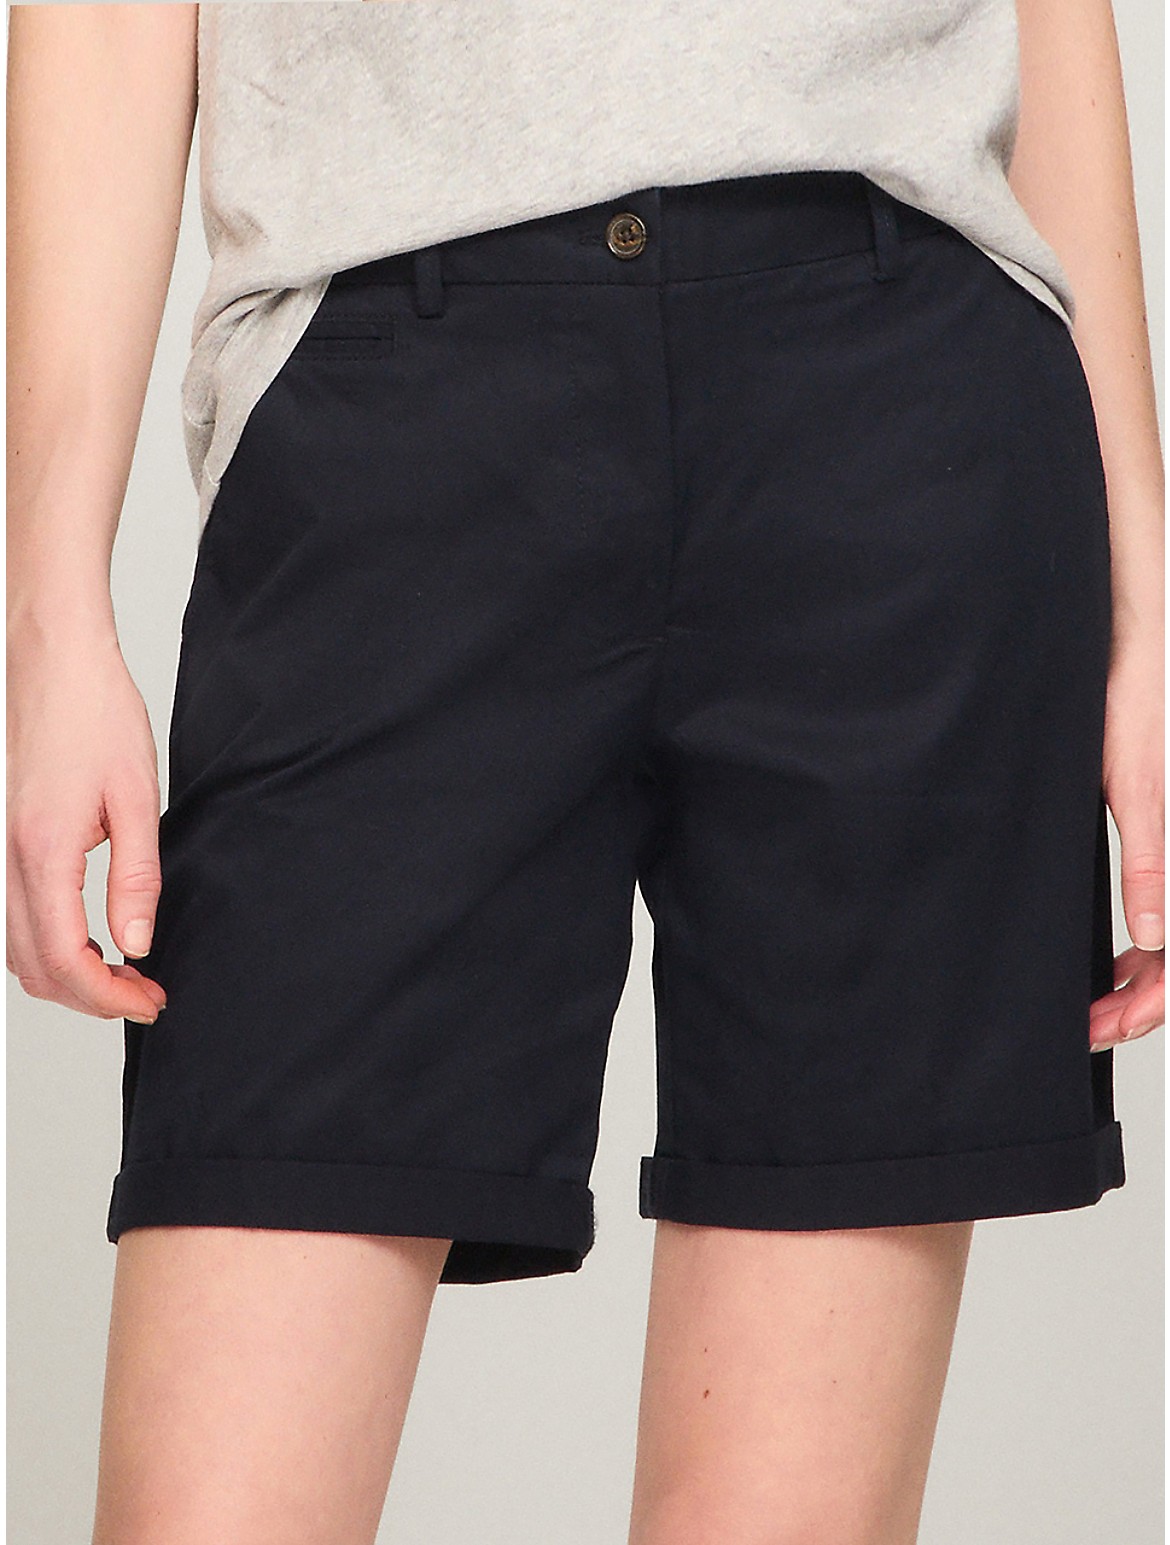 Tommy Hilfiger Women's Solid Stretch Cotton 7 Chino Short